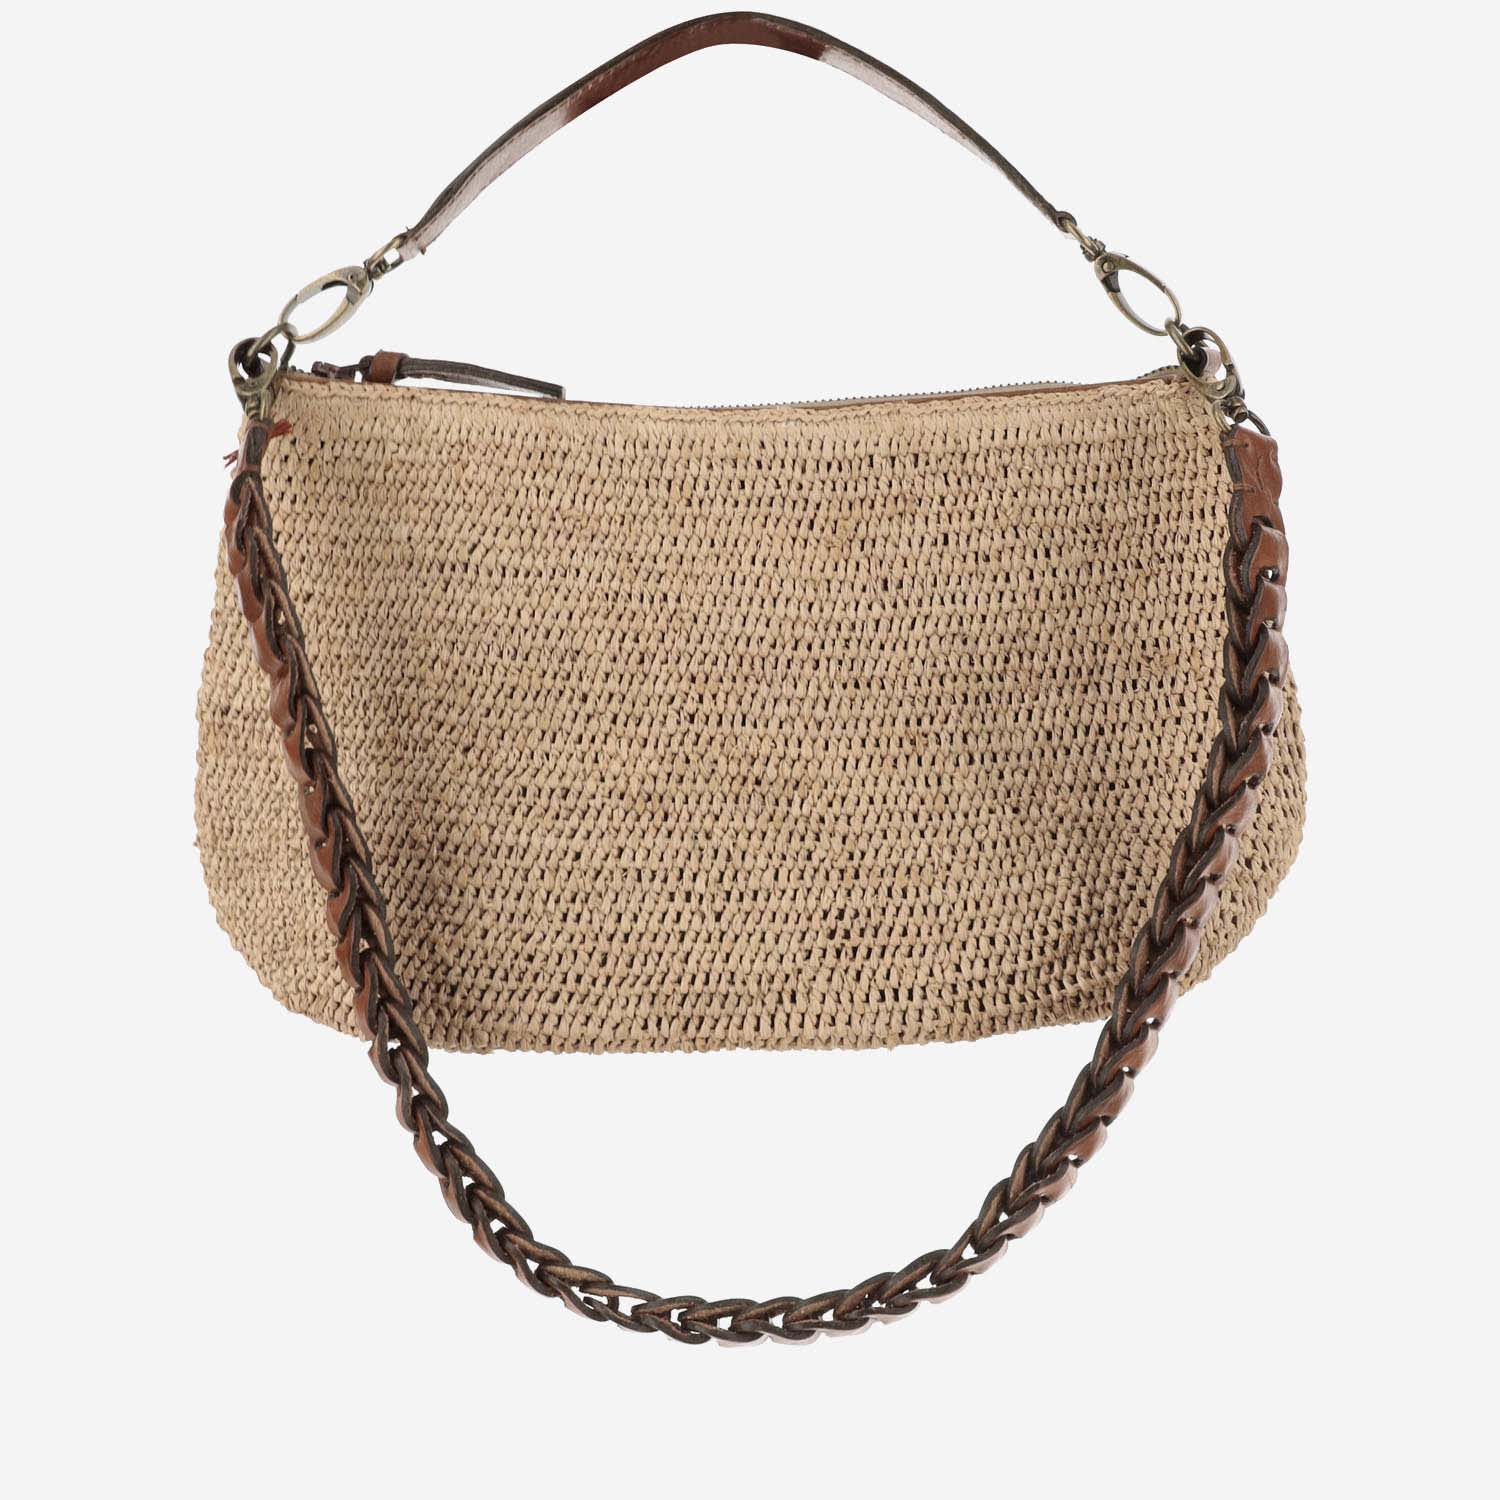 Raffia Bag With Leather Details